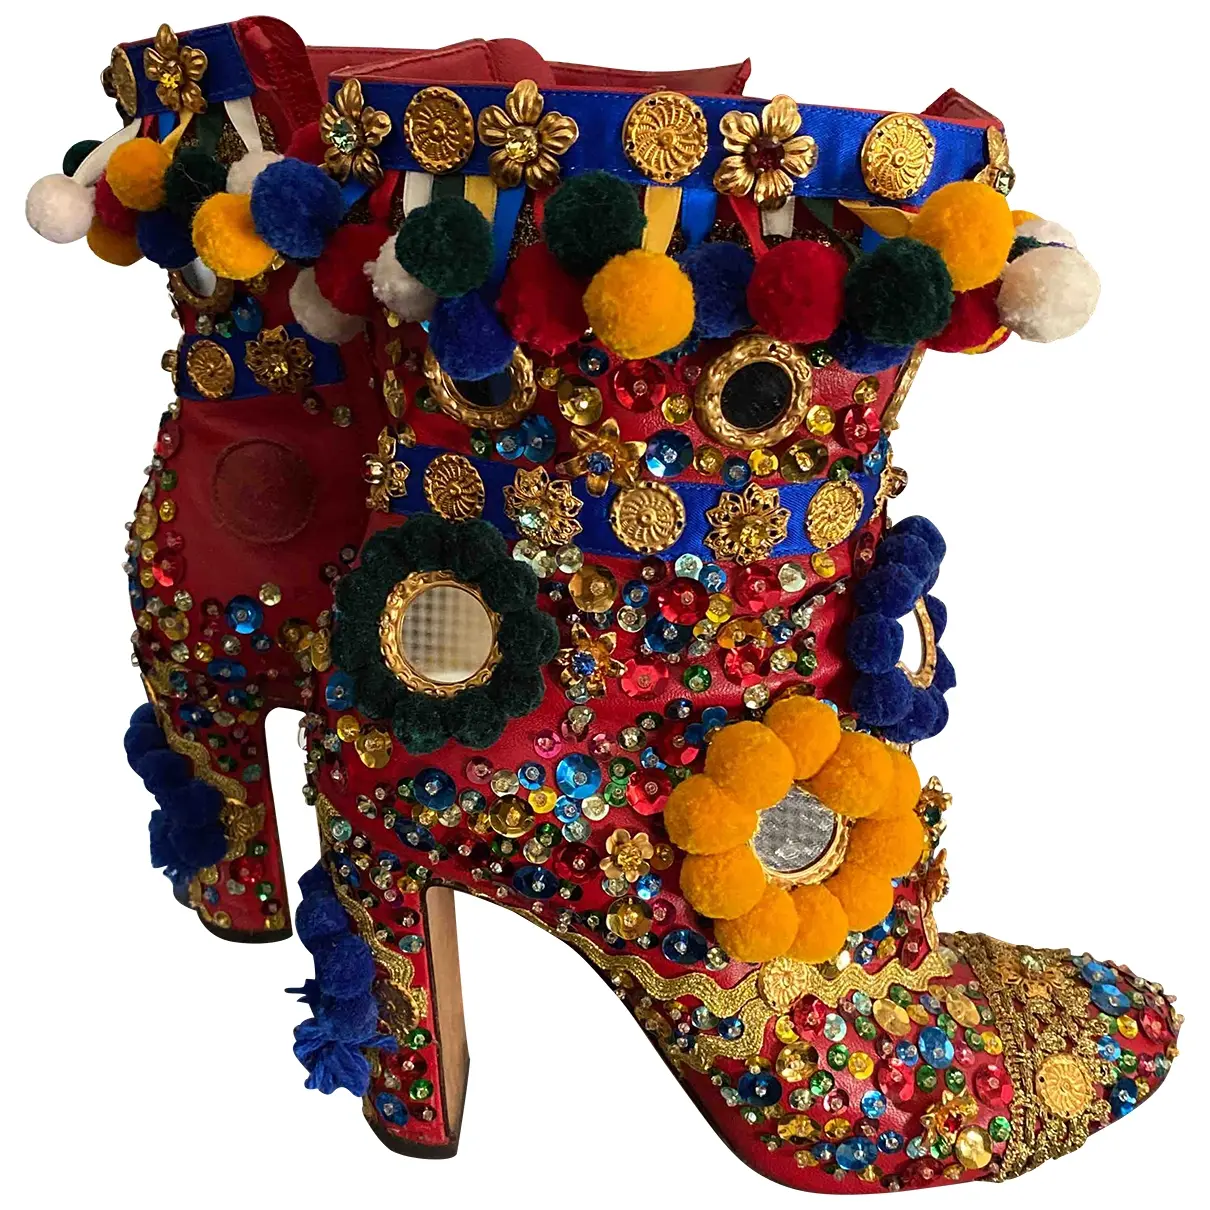 Cloth ankle boots Dolce & Gabbana